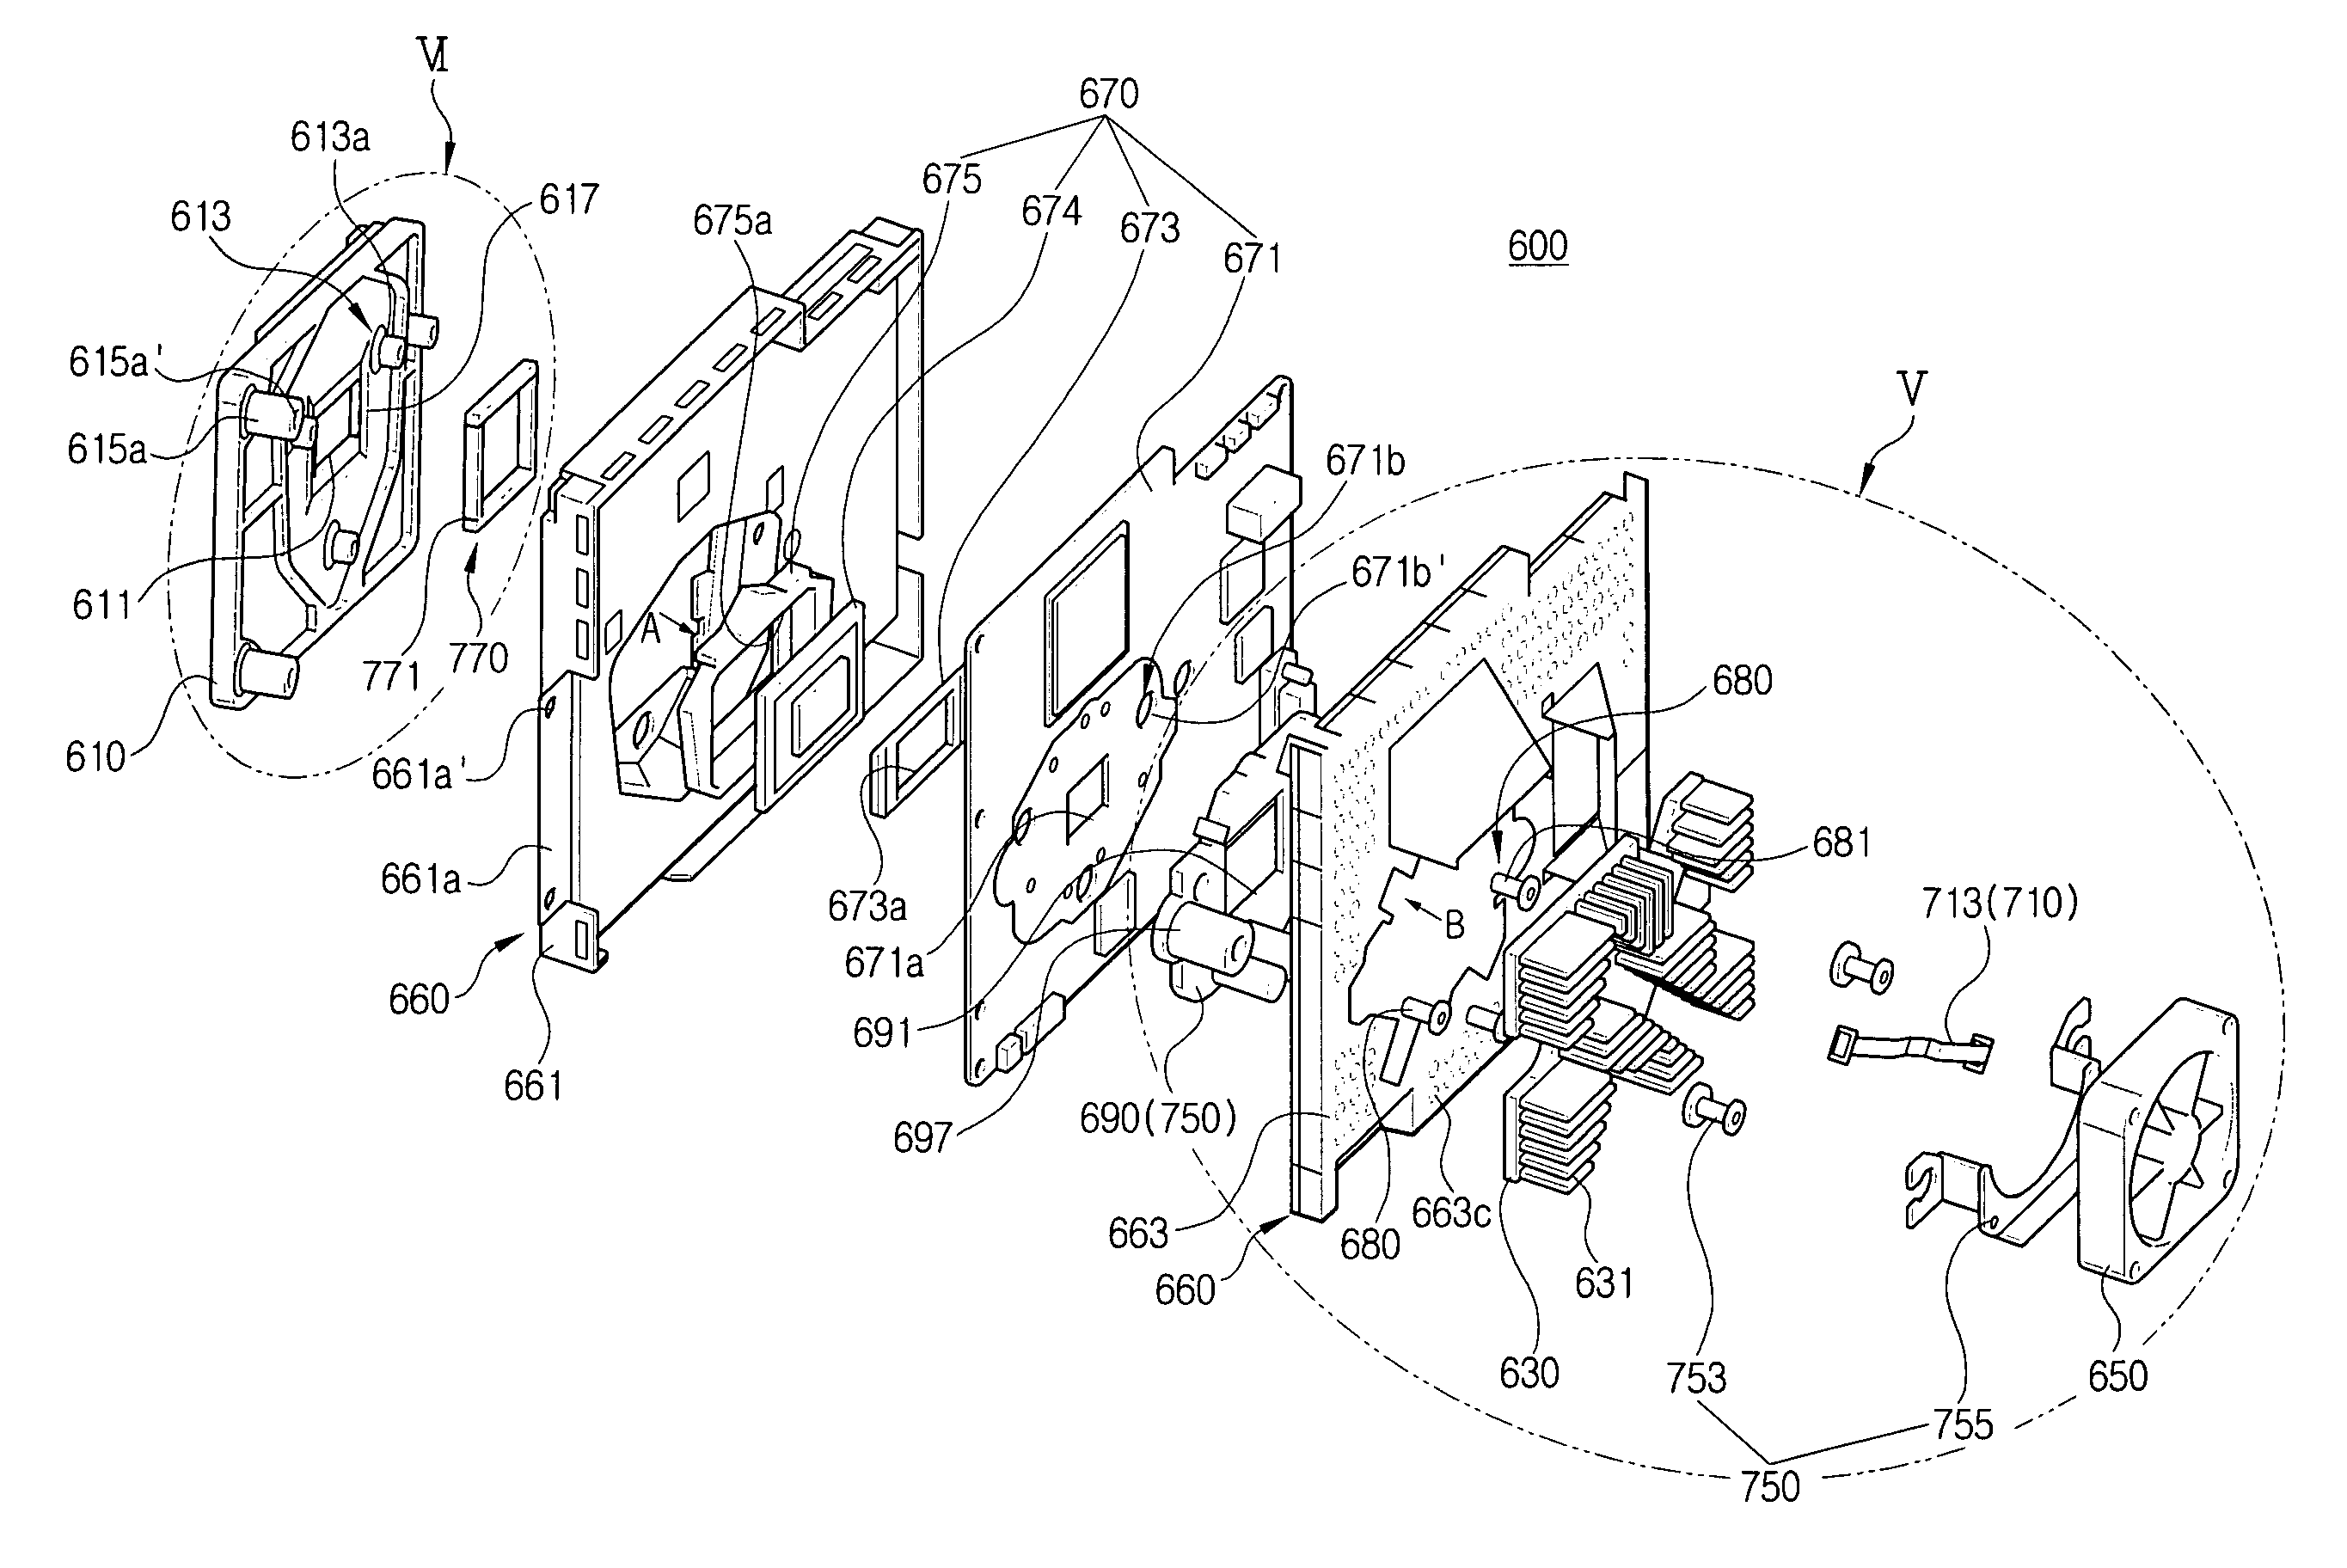 Digital micro-mirror device (DMD) assembly for an optical projection system